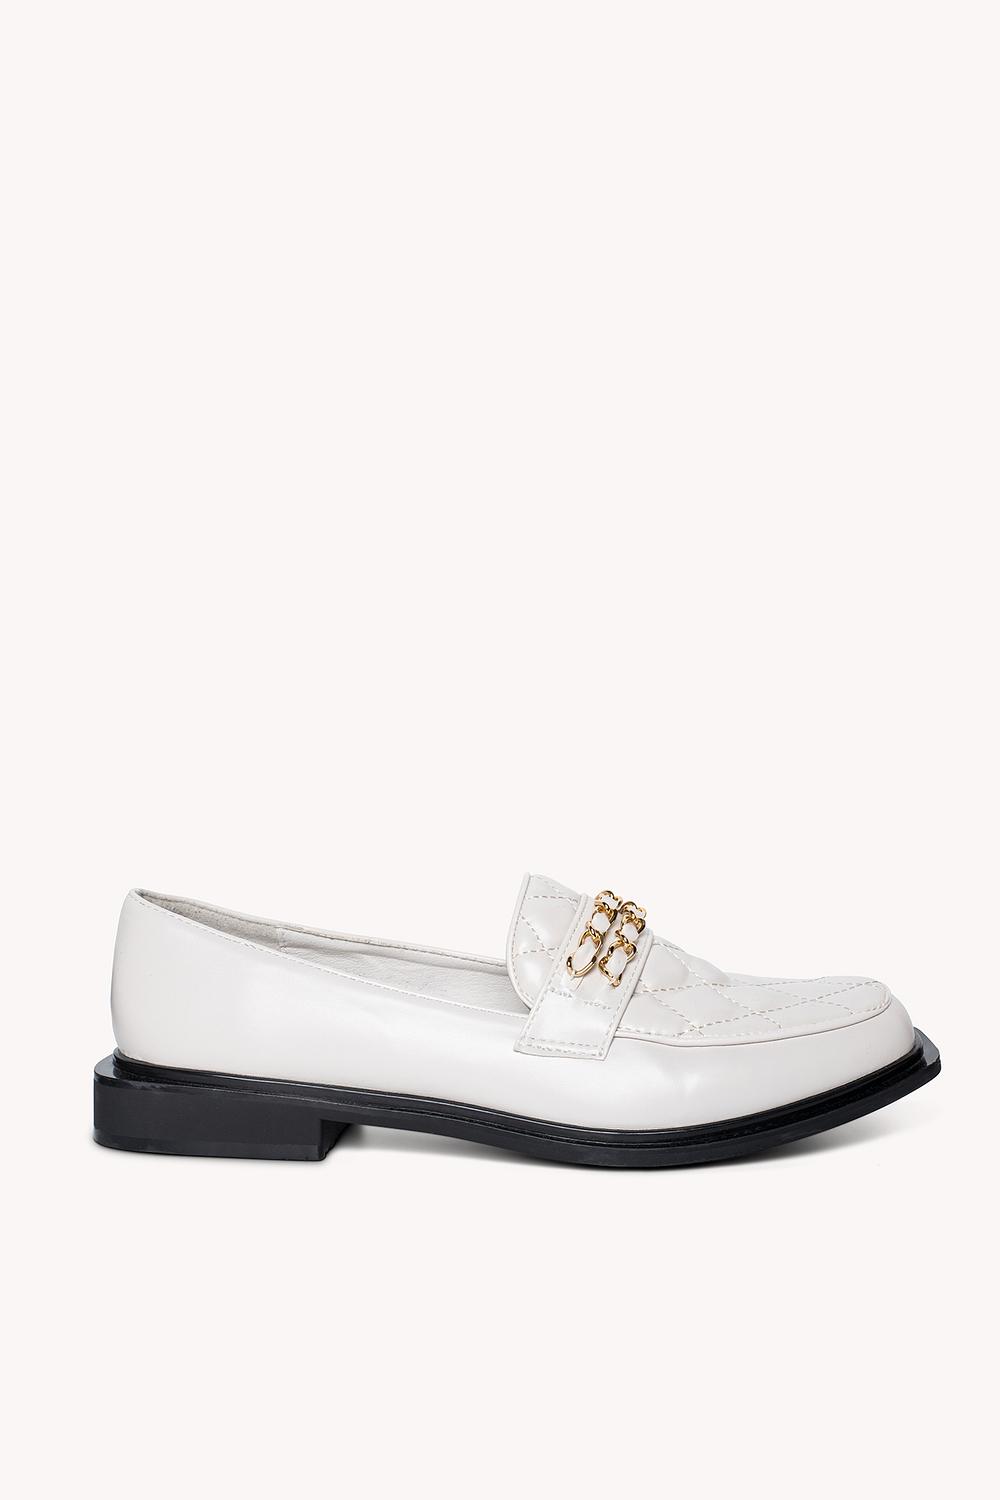 Offwhite loafers